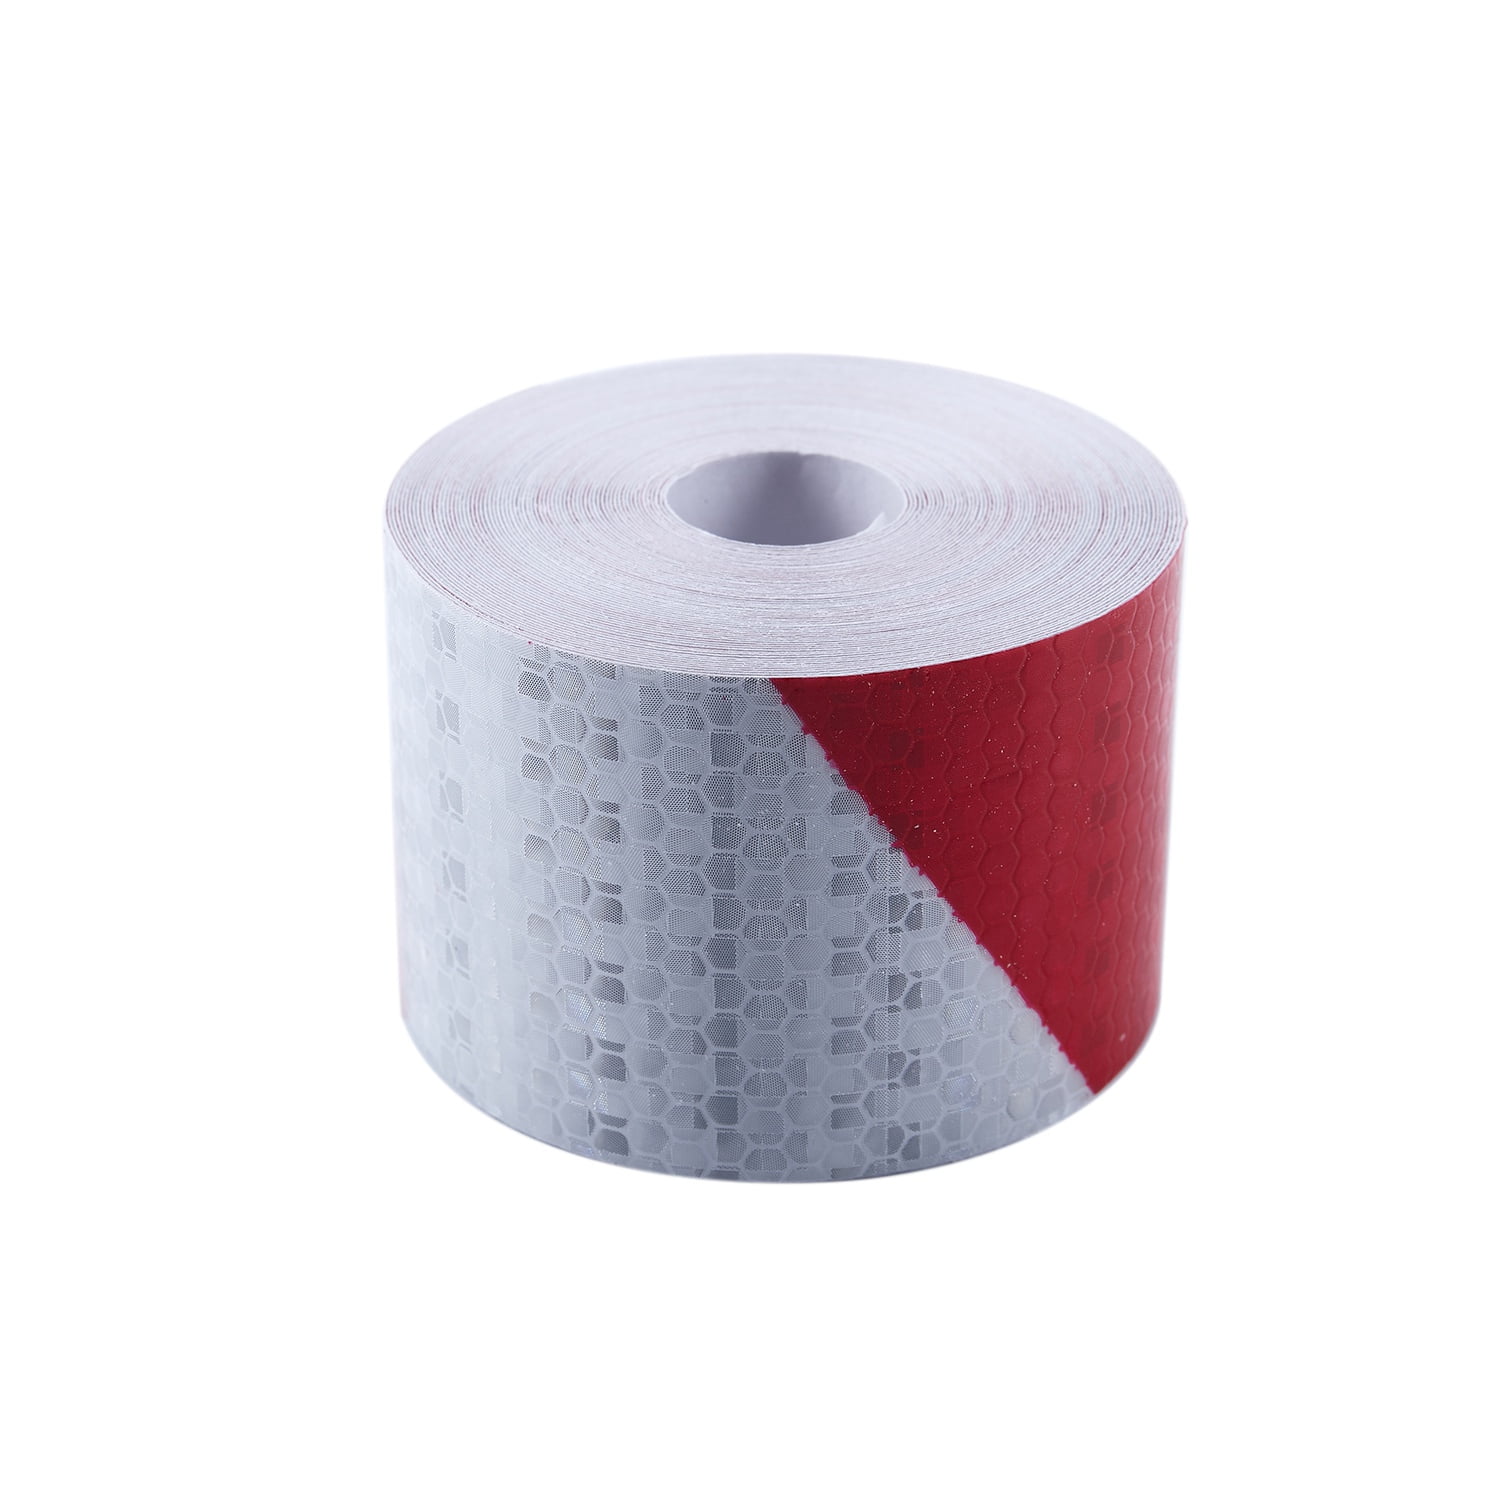 Safety Reflective Warning Tape Caution Self-adhesive Tape Red&Silver 5cm*10m 